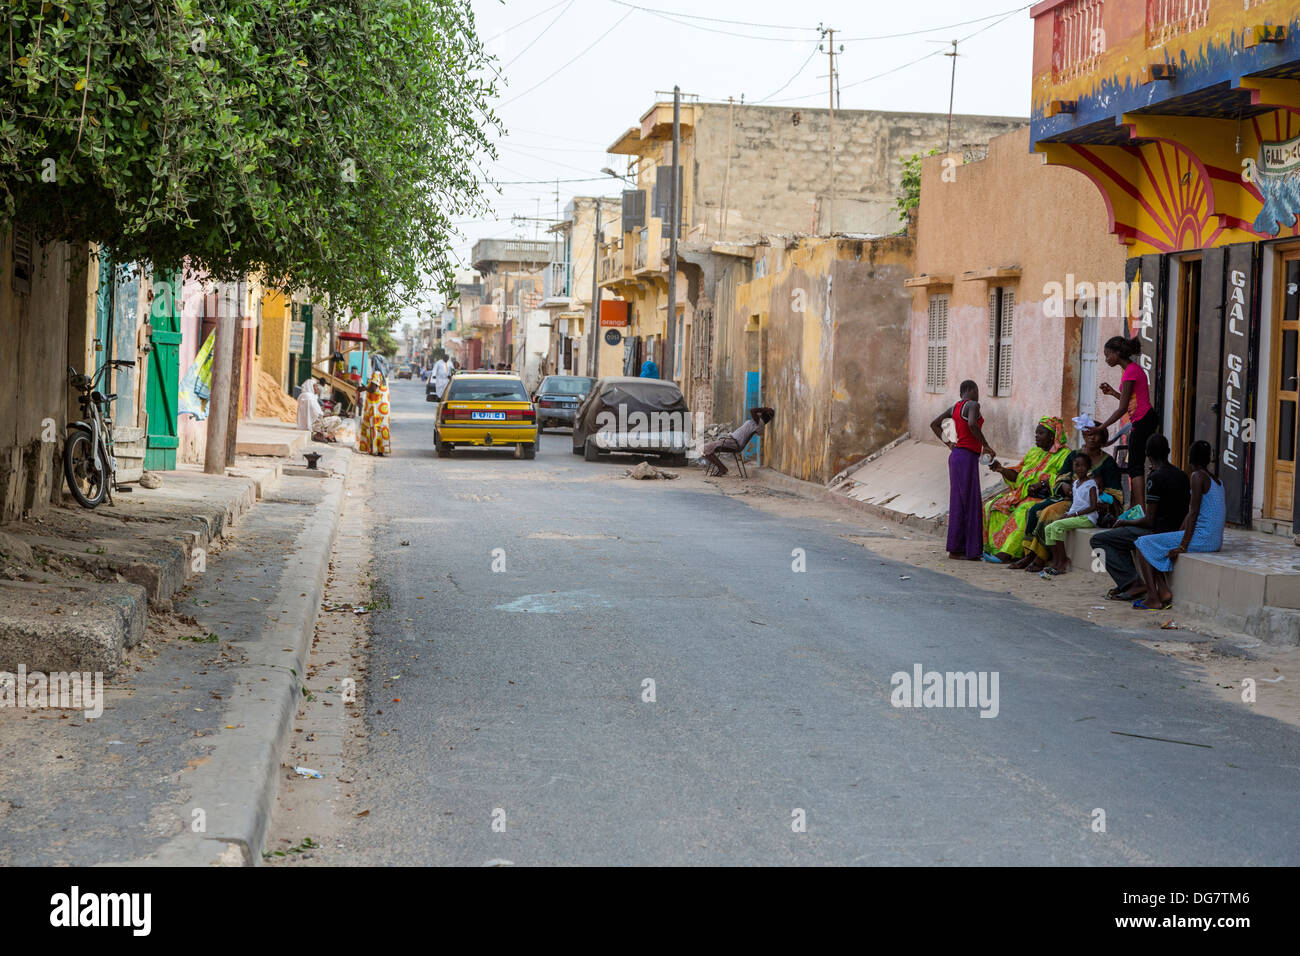 Senegal, Saint Louis. Street Scene. Shops and Residences Sit Side by Side. Stock Photo